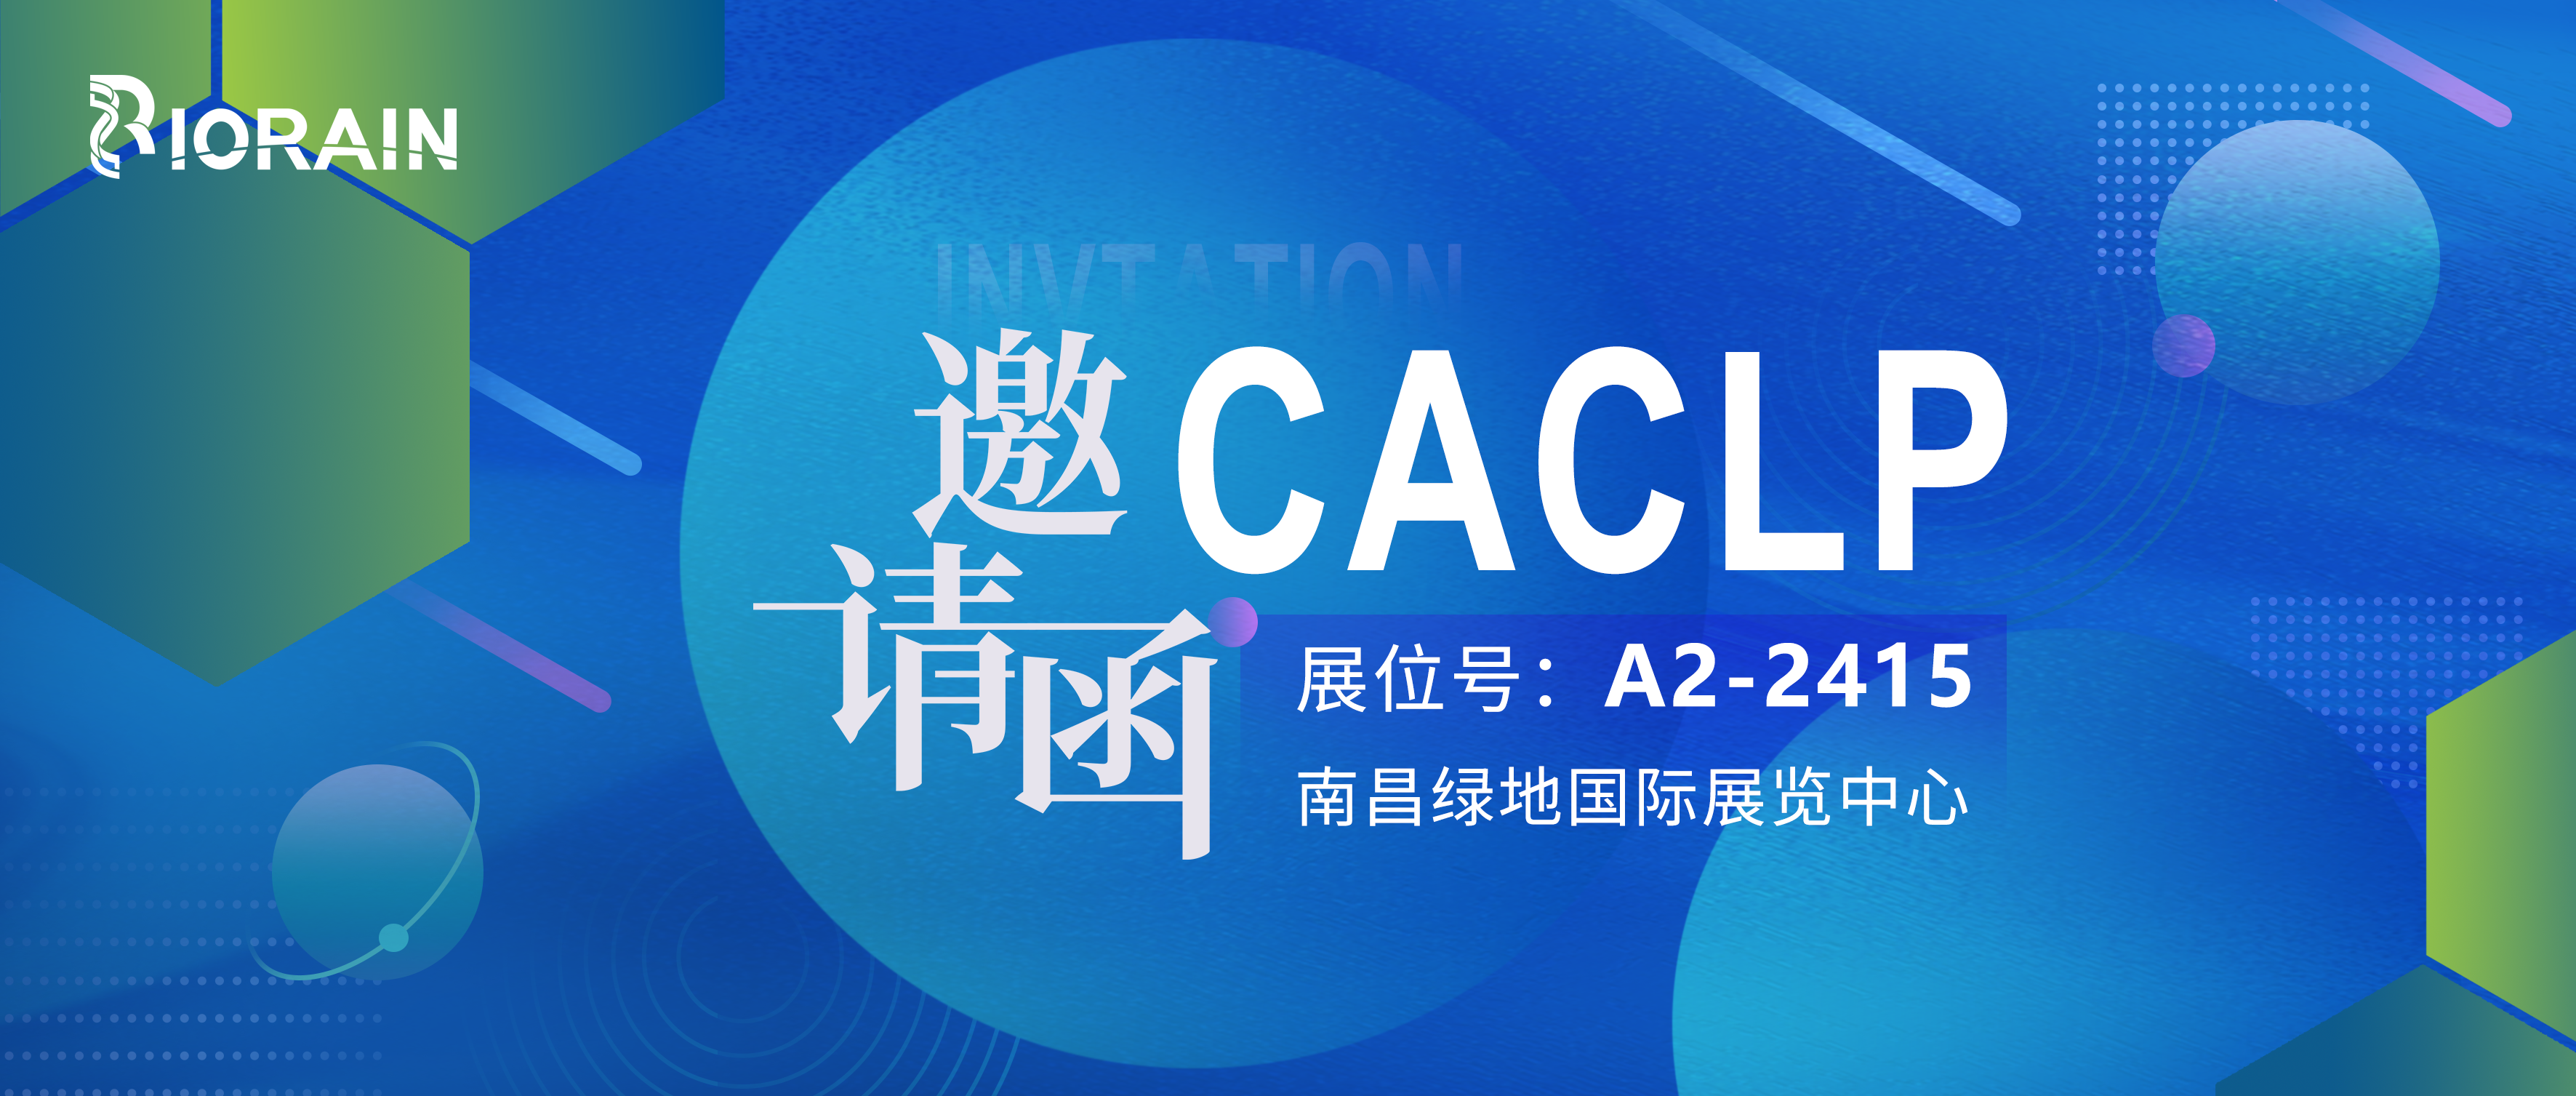 Invitation Letter | Meeting in Nanchang, Biorain Biology invites you to attend the CACLP event togeth